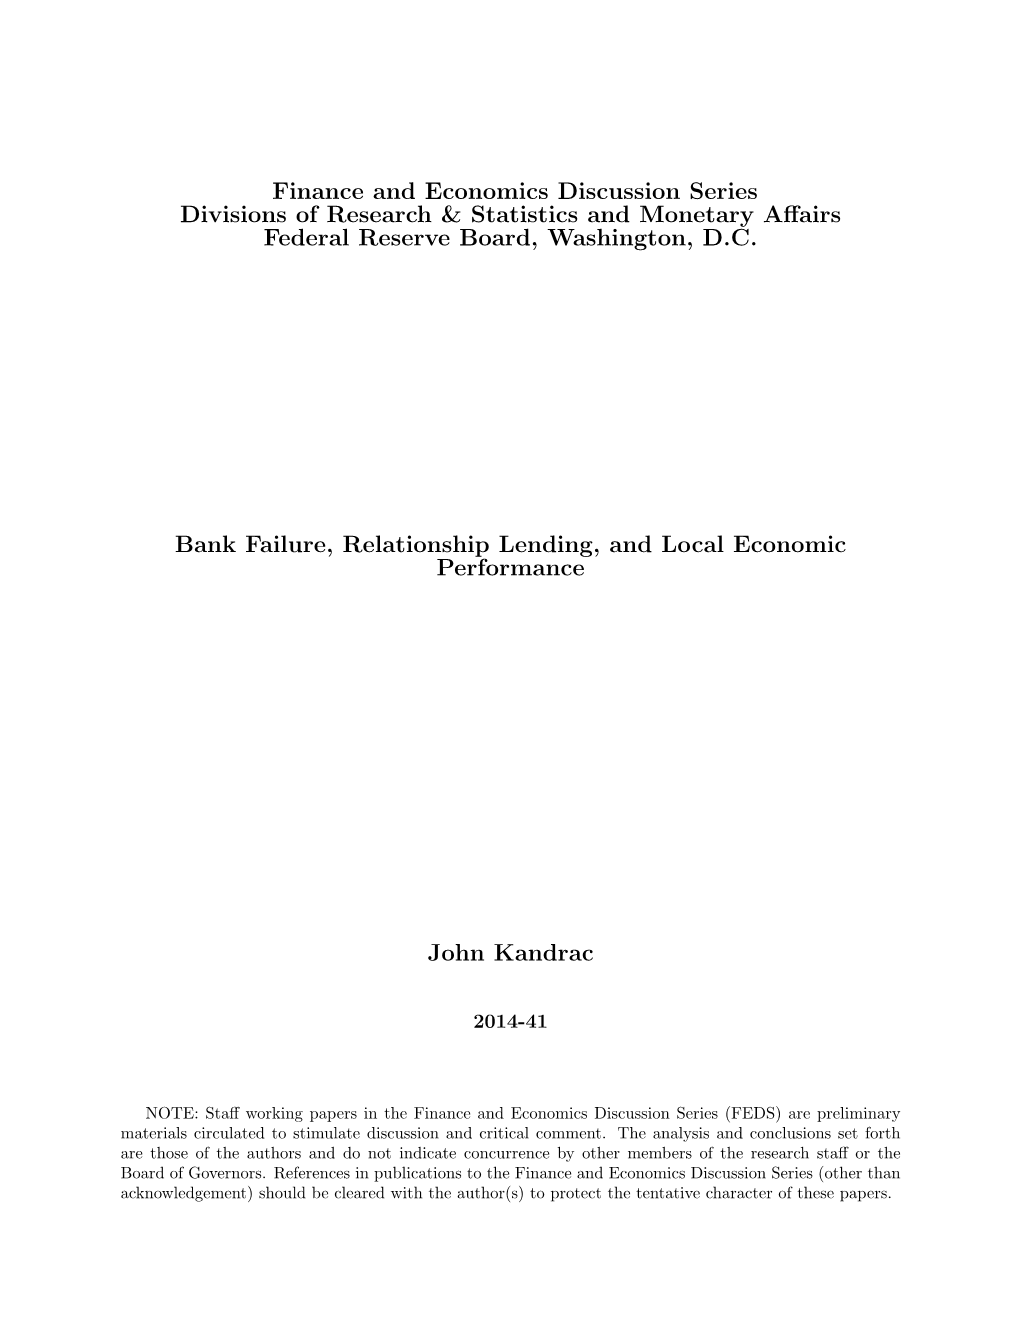 Bank Failure, Relationship Lending, and Local Economic Performance